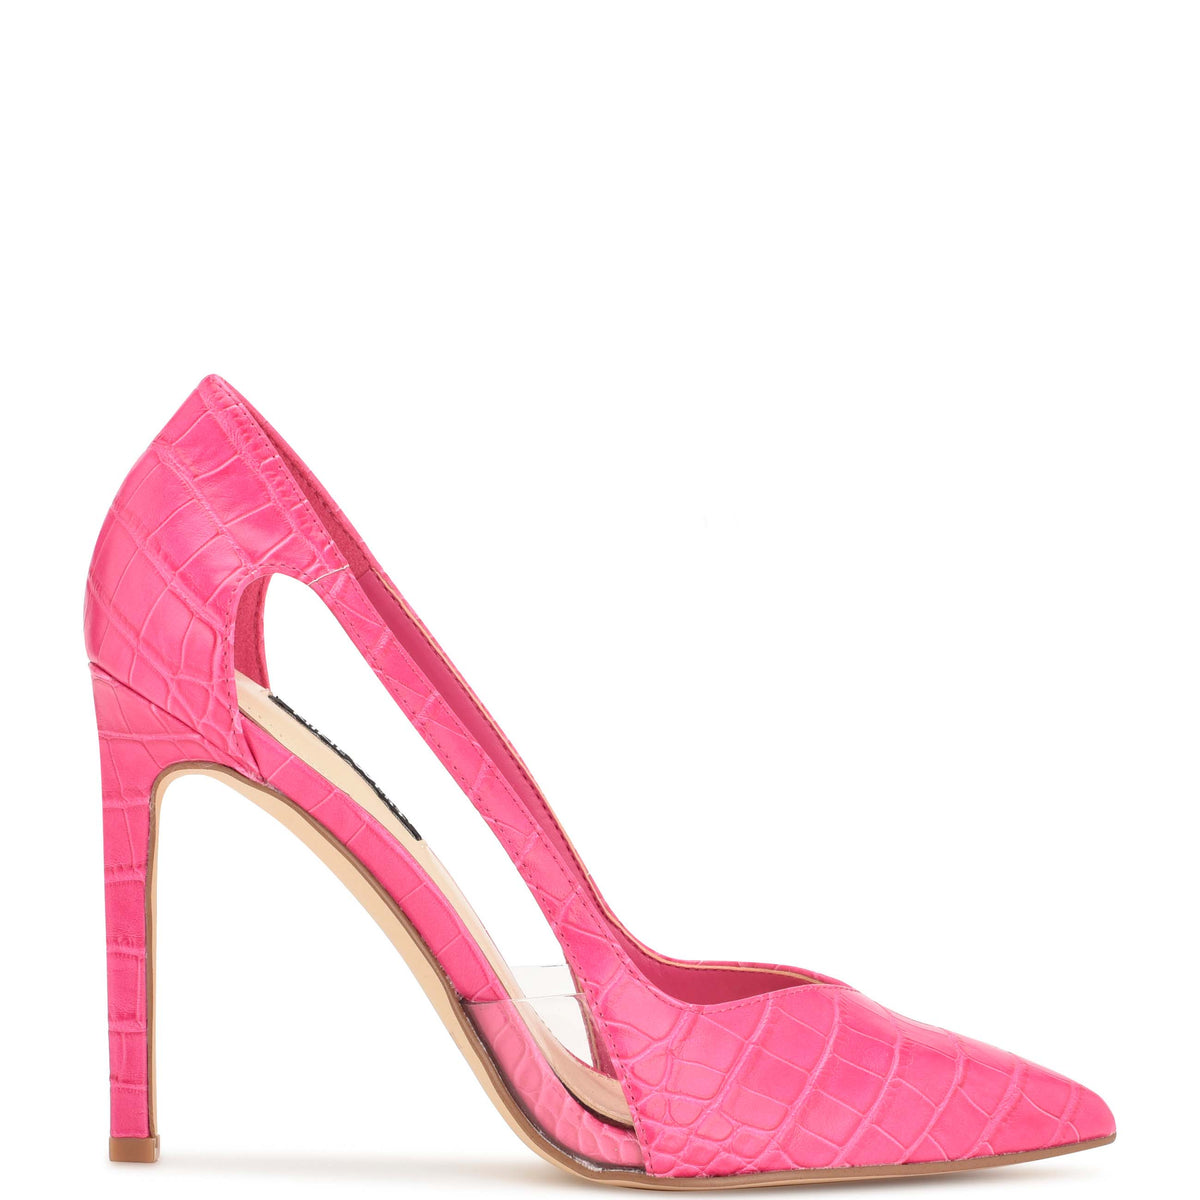 Trivs Pointy Toe Pumps